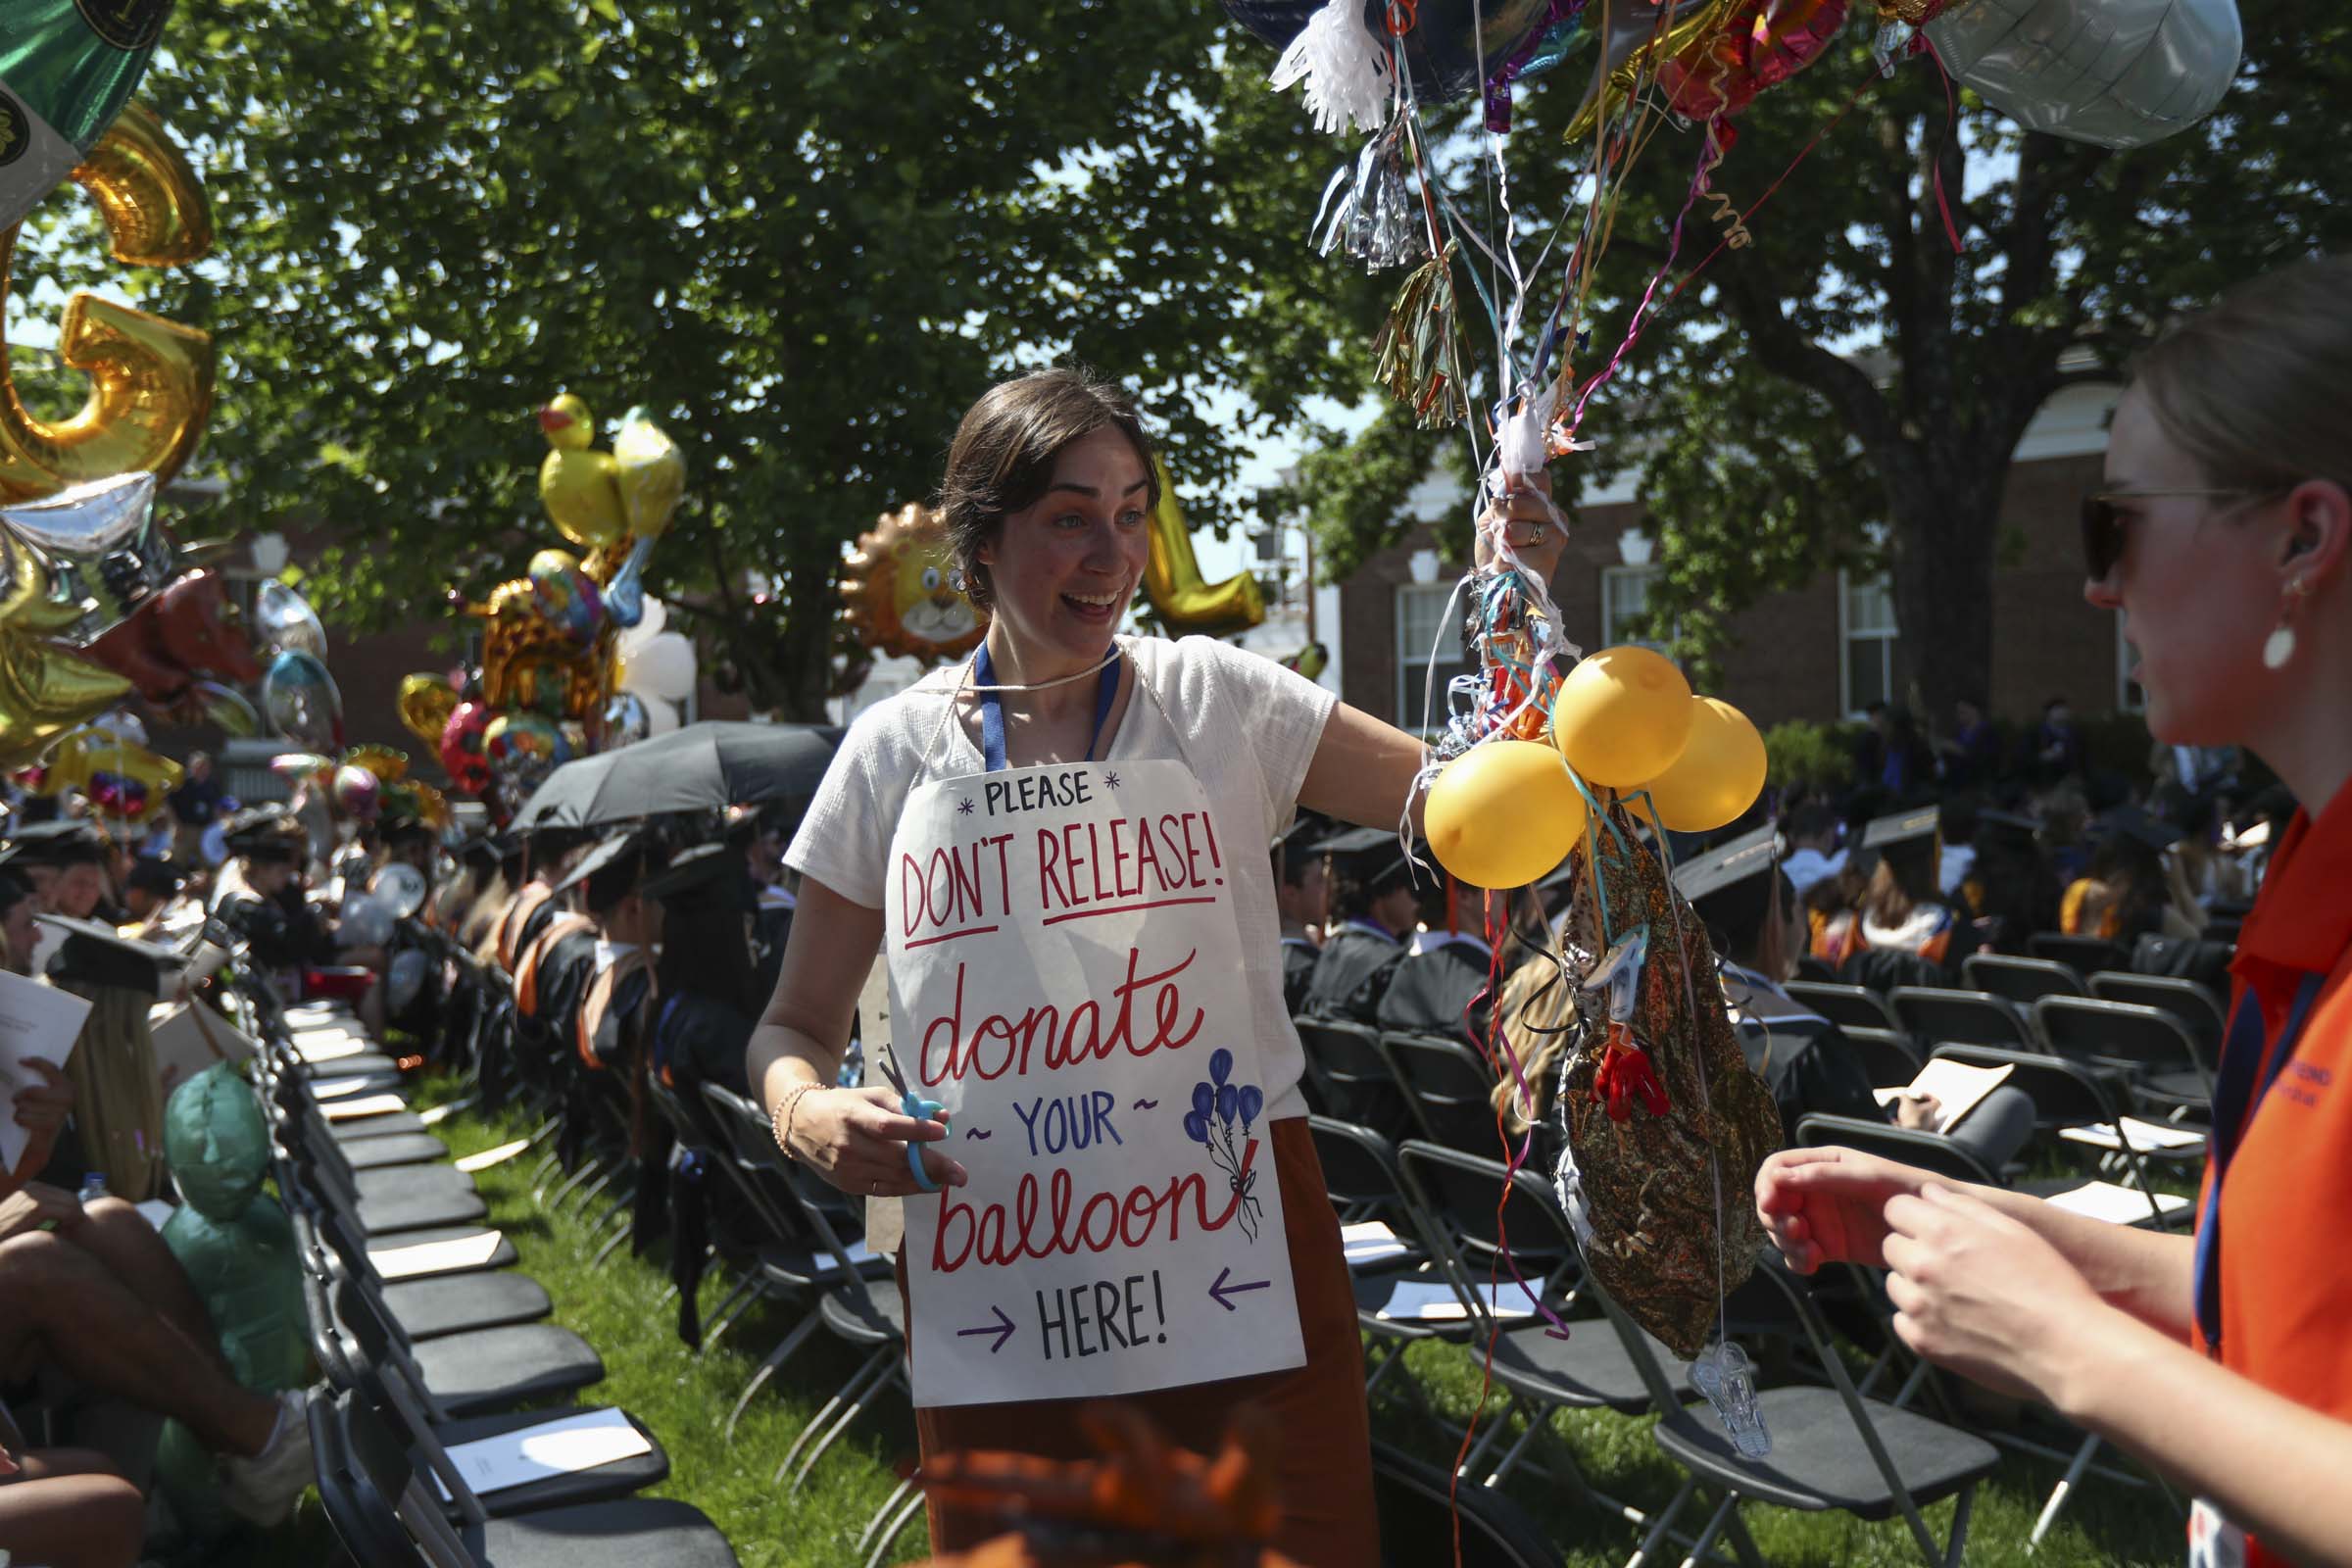 A woman wears a sign asks students not to release their balloons, but to instead let her collect them for the UVA Children's Hospital.